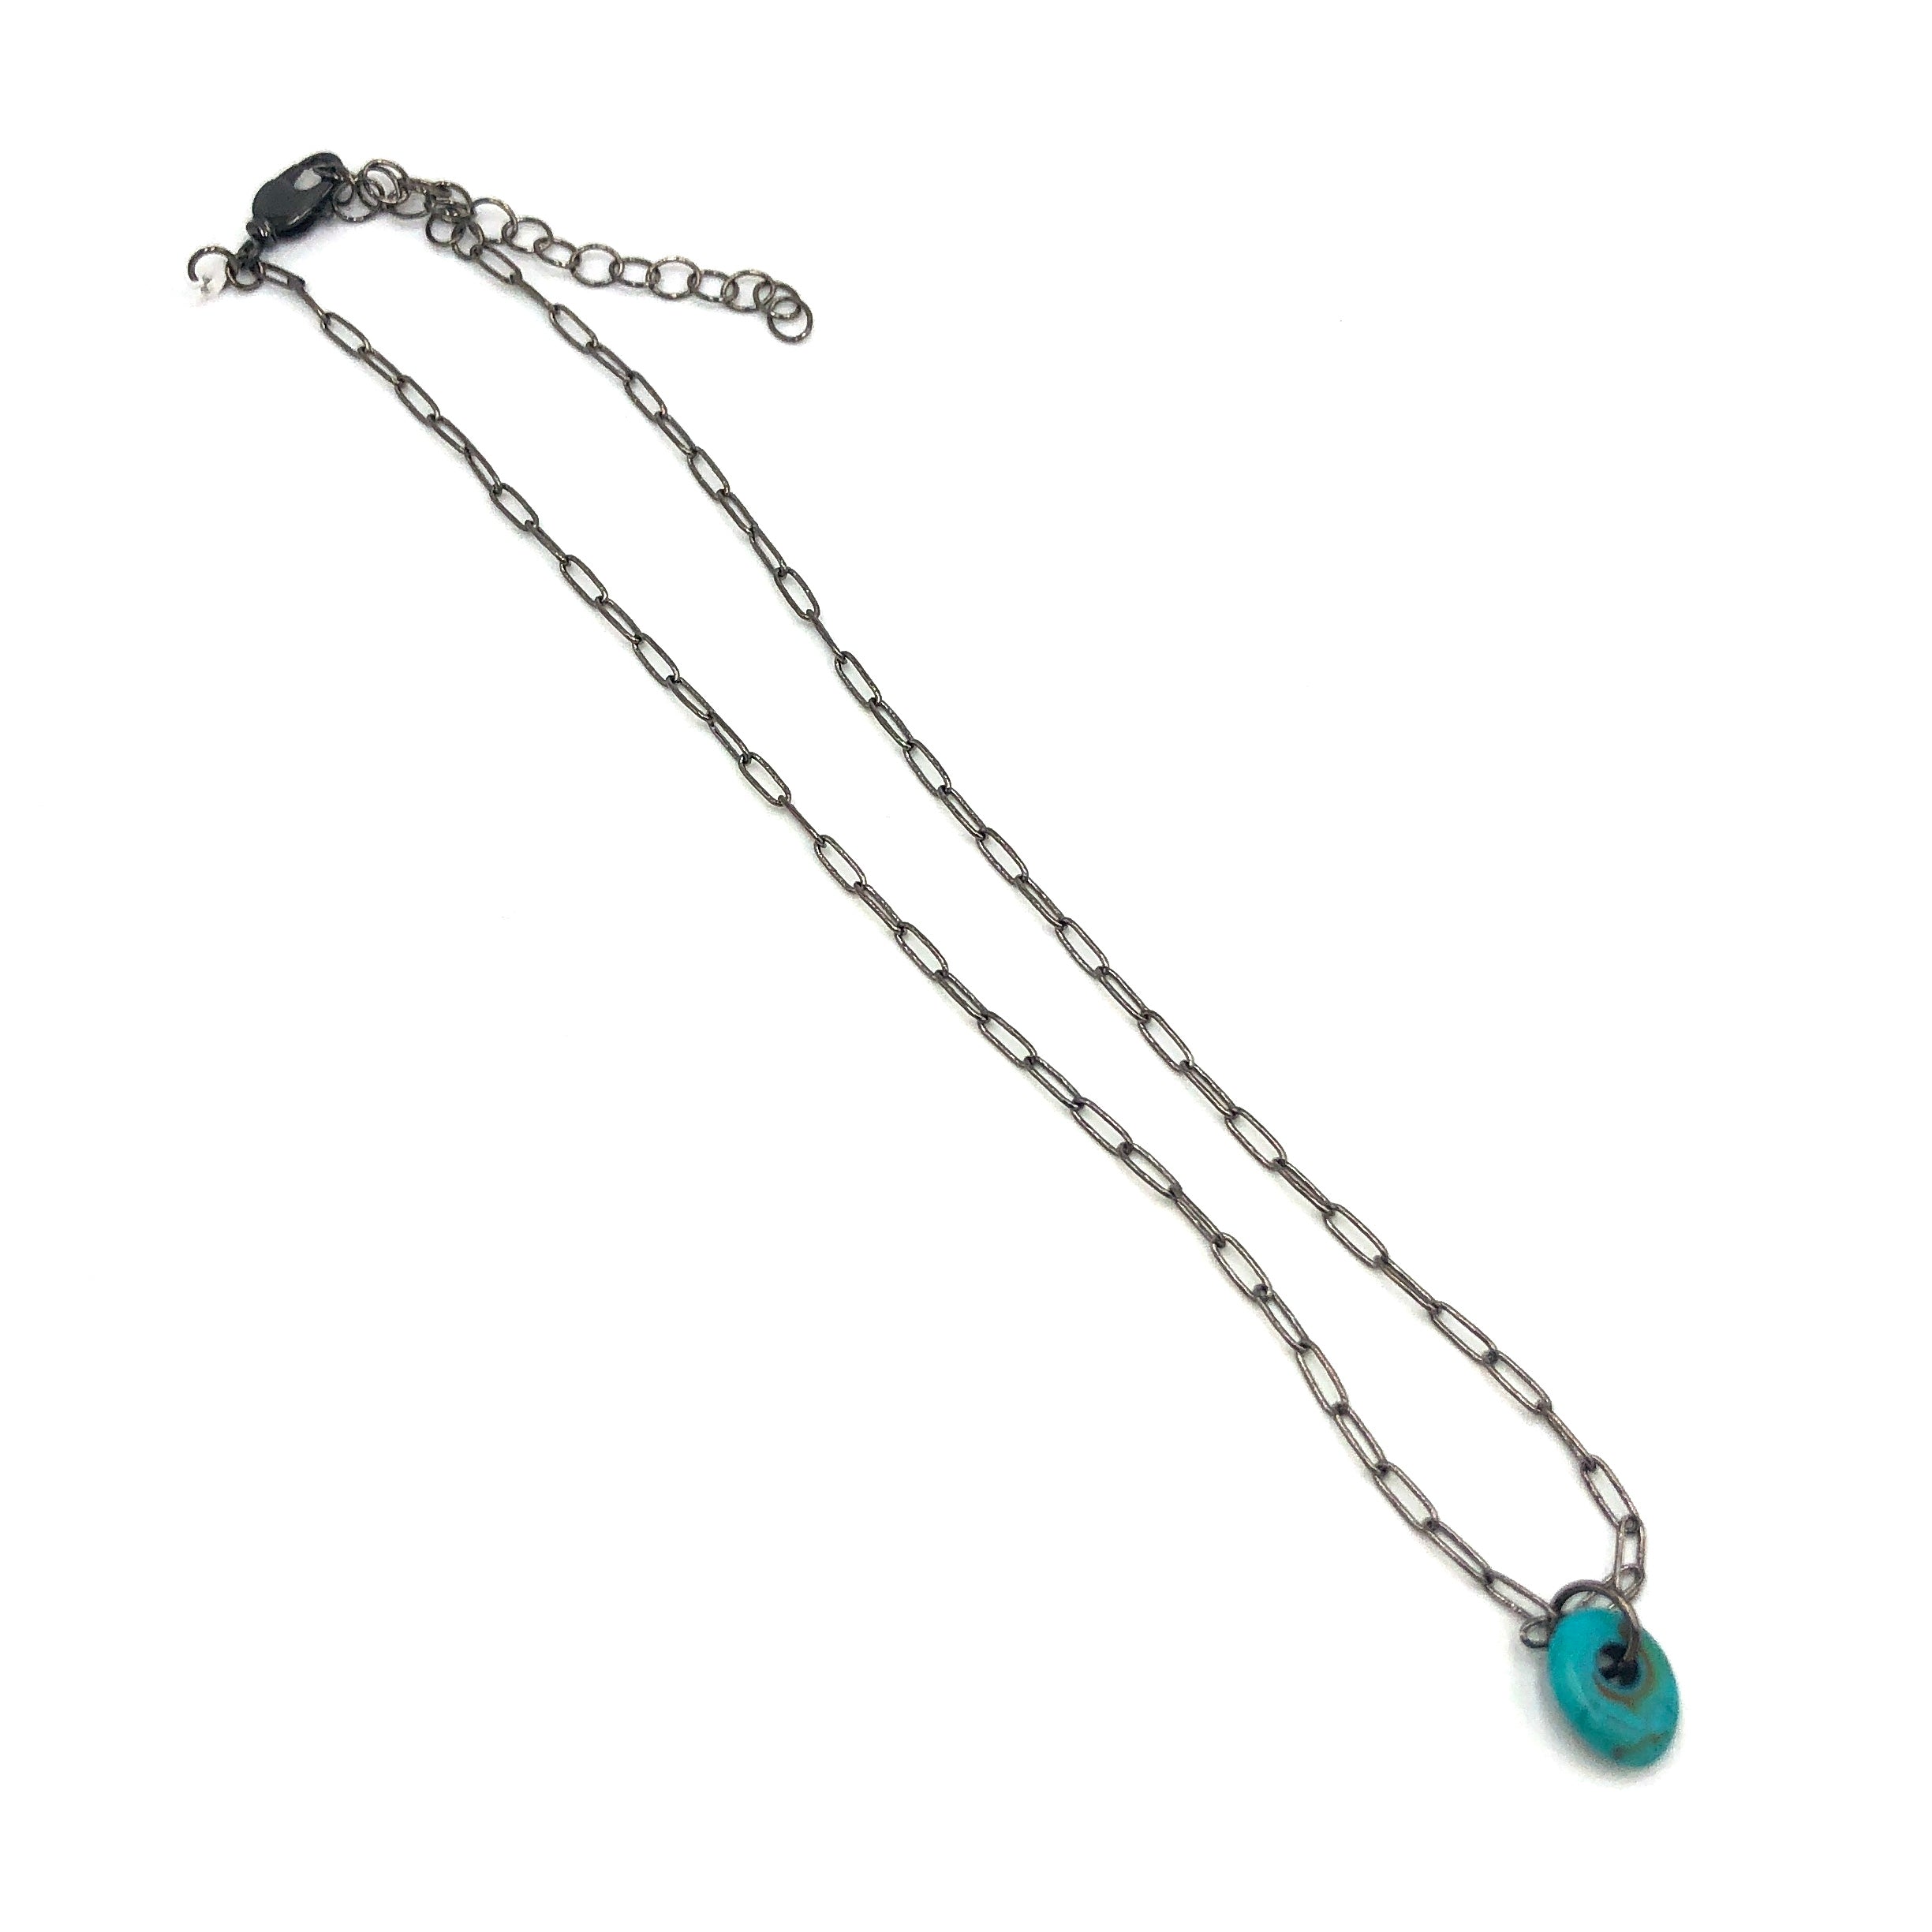 Turquoise Lucite Nugget Chain Necklace - Unboxing - 